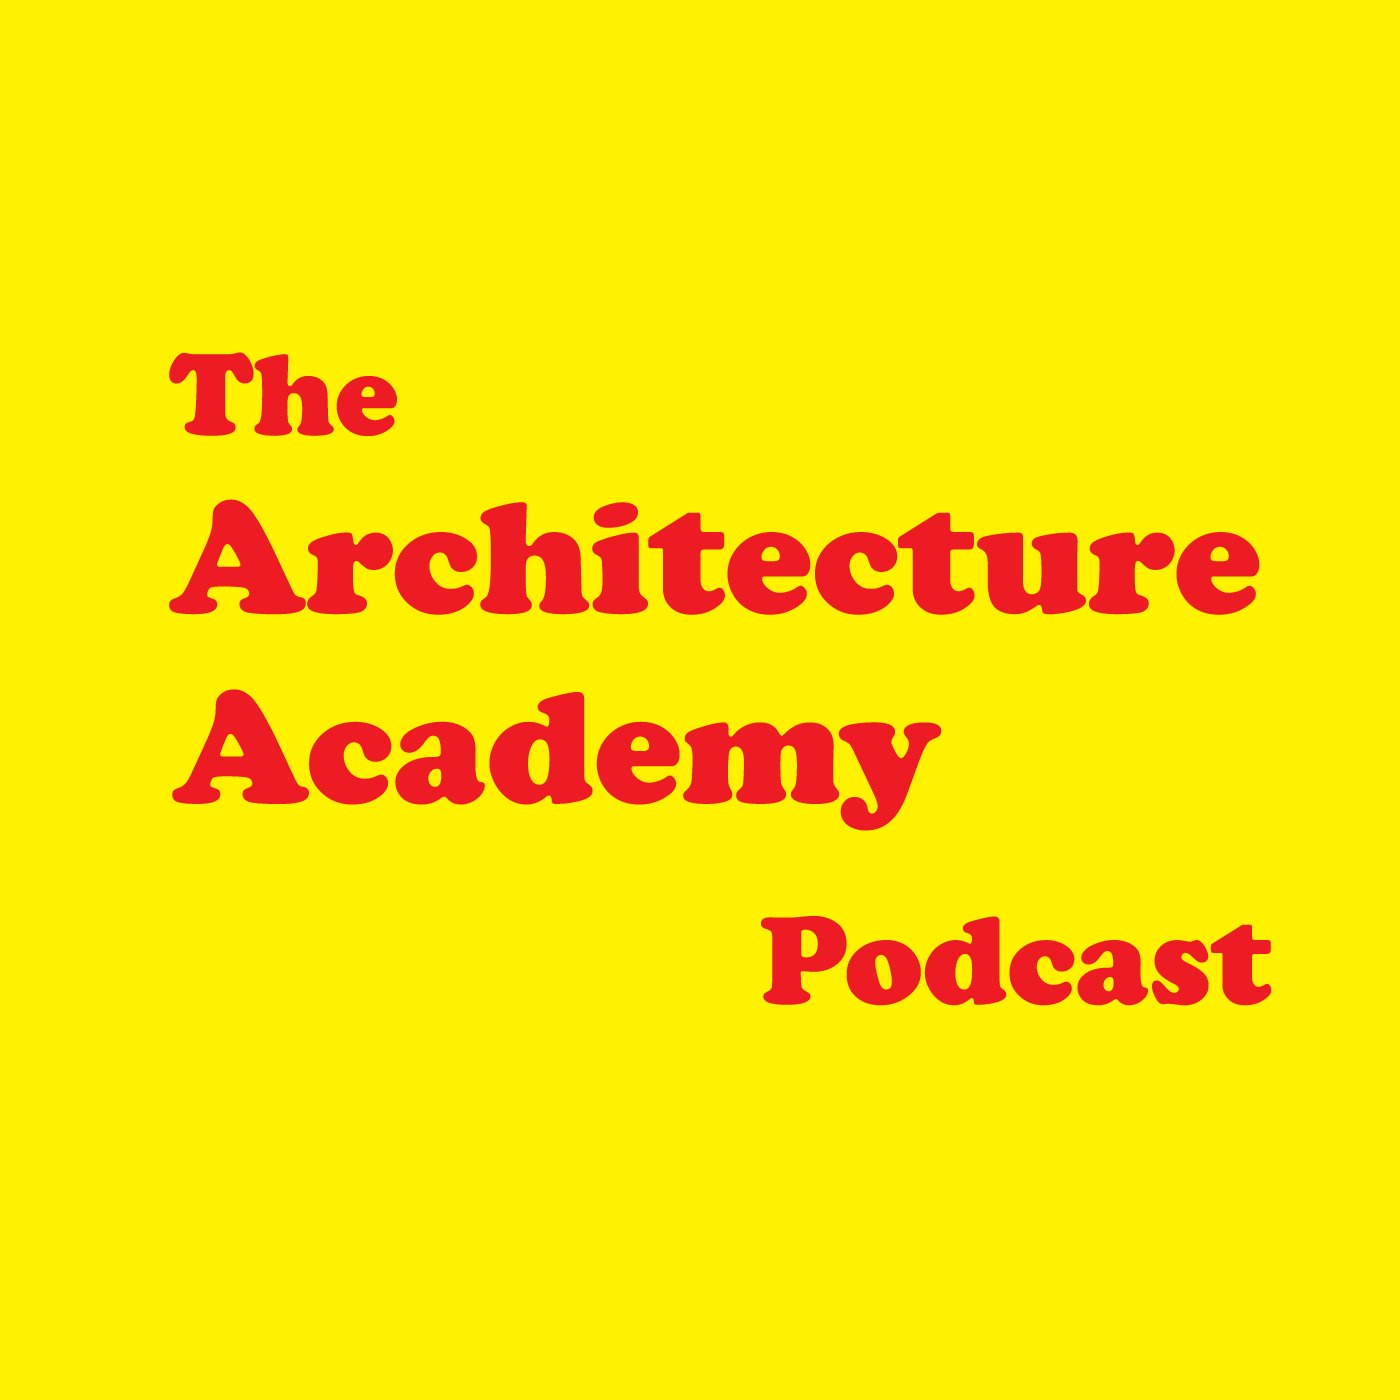 From zero energy design to the philosophy of what makes things beautiful. The Architecture Academy podcast explores the ideas shaping our world today.